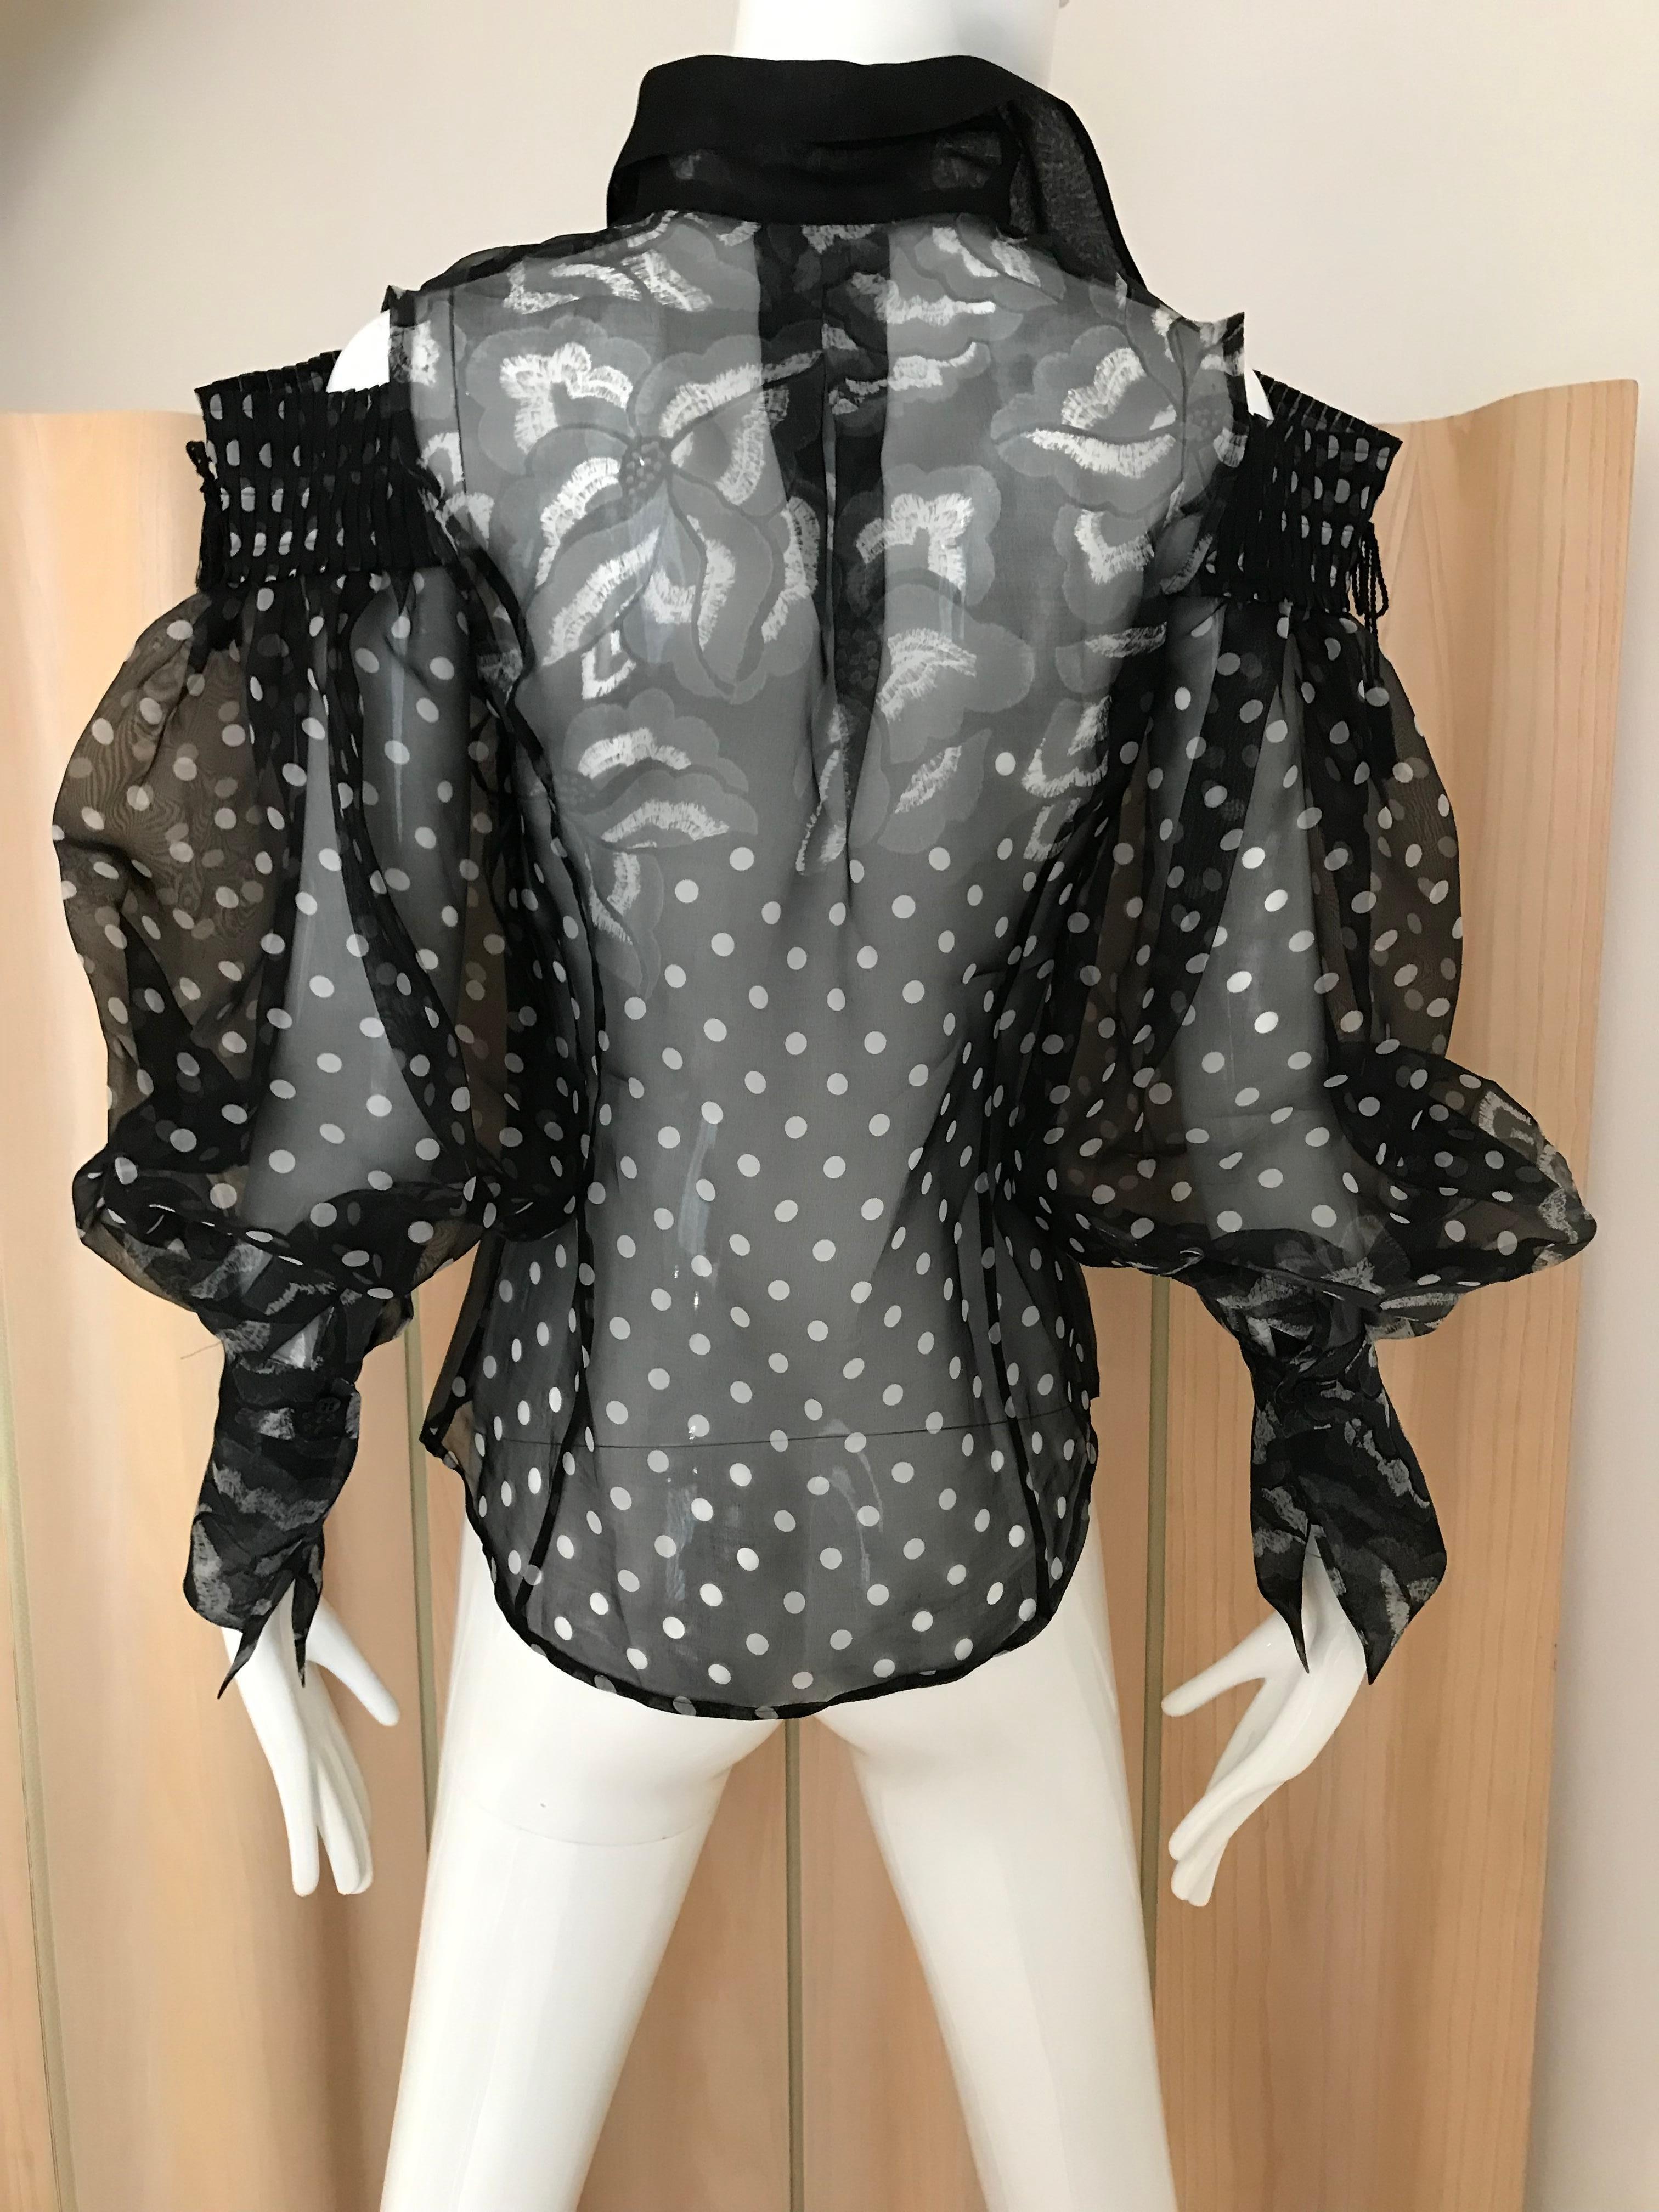 Gianfranco Ferre Black Polka dot Silk Blouse  In Excellent Condition For Sale In Beverly Hills, CA